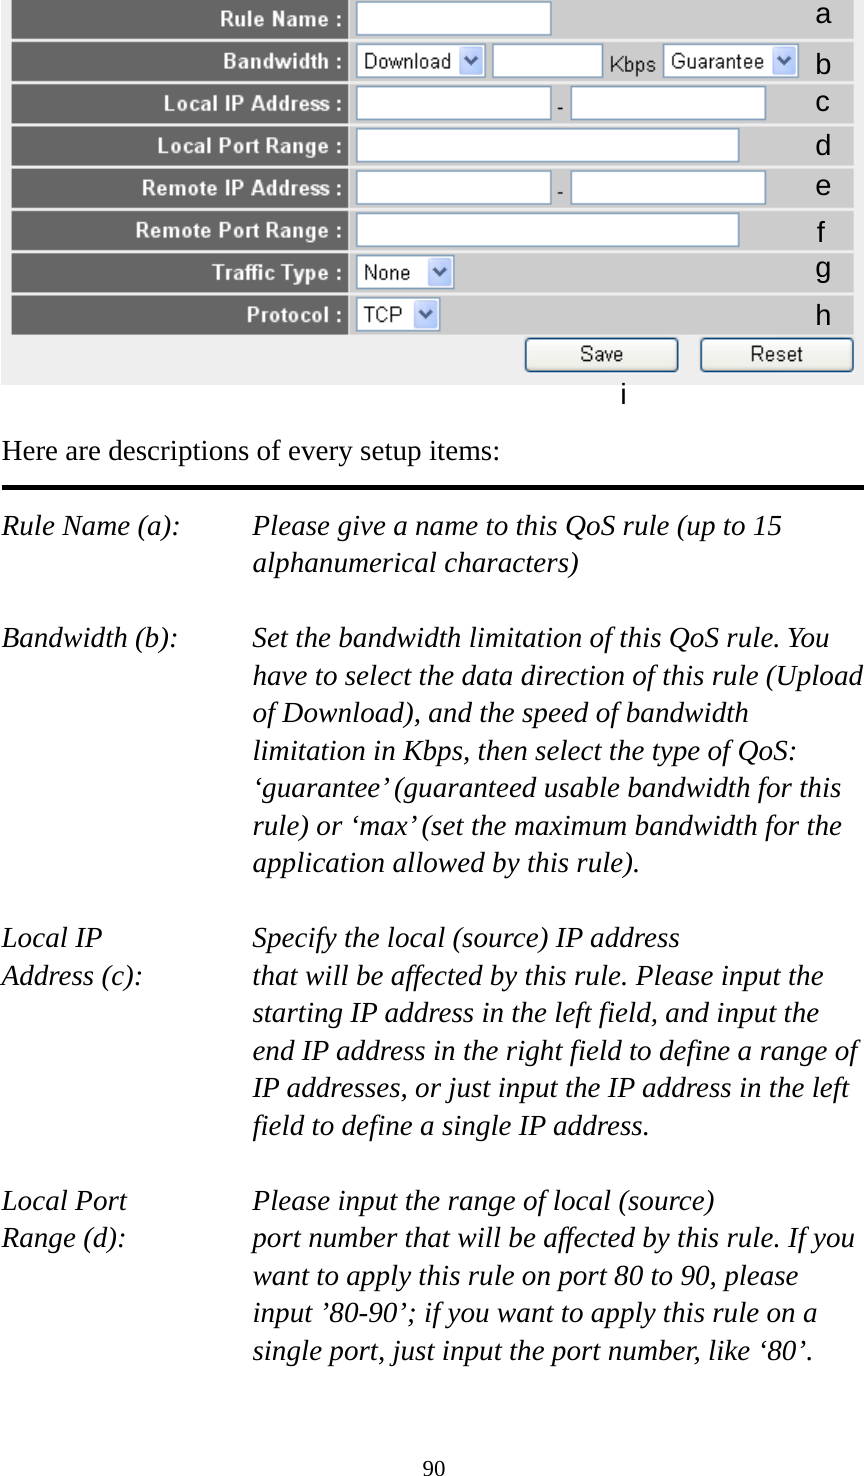 90   Here are descriptions of every setup items:  Rule Name (a):    Please give a name to this QoS rule (up to 15 alphanumerical characters)  Bandwidth (b):    Set the bandwidth limitation of this QoS rule. You have to select the data direction of this rule (Upload of Download), and the speed of bandwidth limitation in Kbps, then select the type of QoS: ‘guarantee’ (guaranteed usable bandwidth for this rule) or ‘max’ (set the maximum bandwidth for the application allowed by this rule).  Local IP        Specify the local (source) IP address Address (c):     that will be affected by this rule. Please input the starting IP address in the left field, and input the end IP address in the right field to define a range of IP addresses, or just input the IP address in the left field to define a single IP address.  Local Port       Please input the range of local (source) Range (d):    port number that will be affected by this rule. If you want to apply this rule on port 80 to 90, please input ’80-90’; if you want to apply this rule on a single port, just input the port number, like ‘80’.  a b c d e f g h i